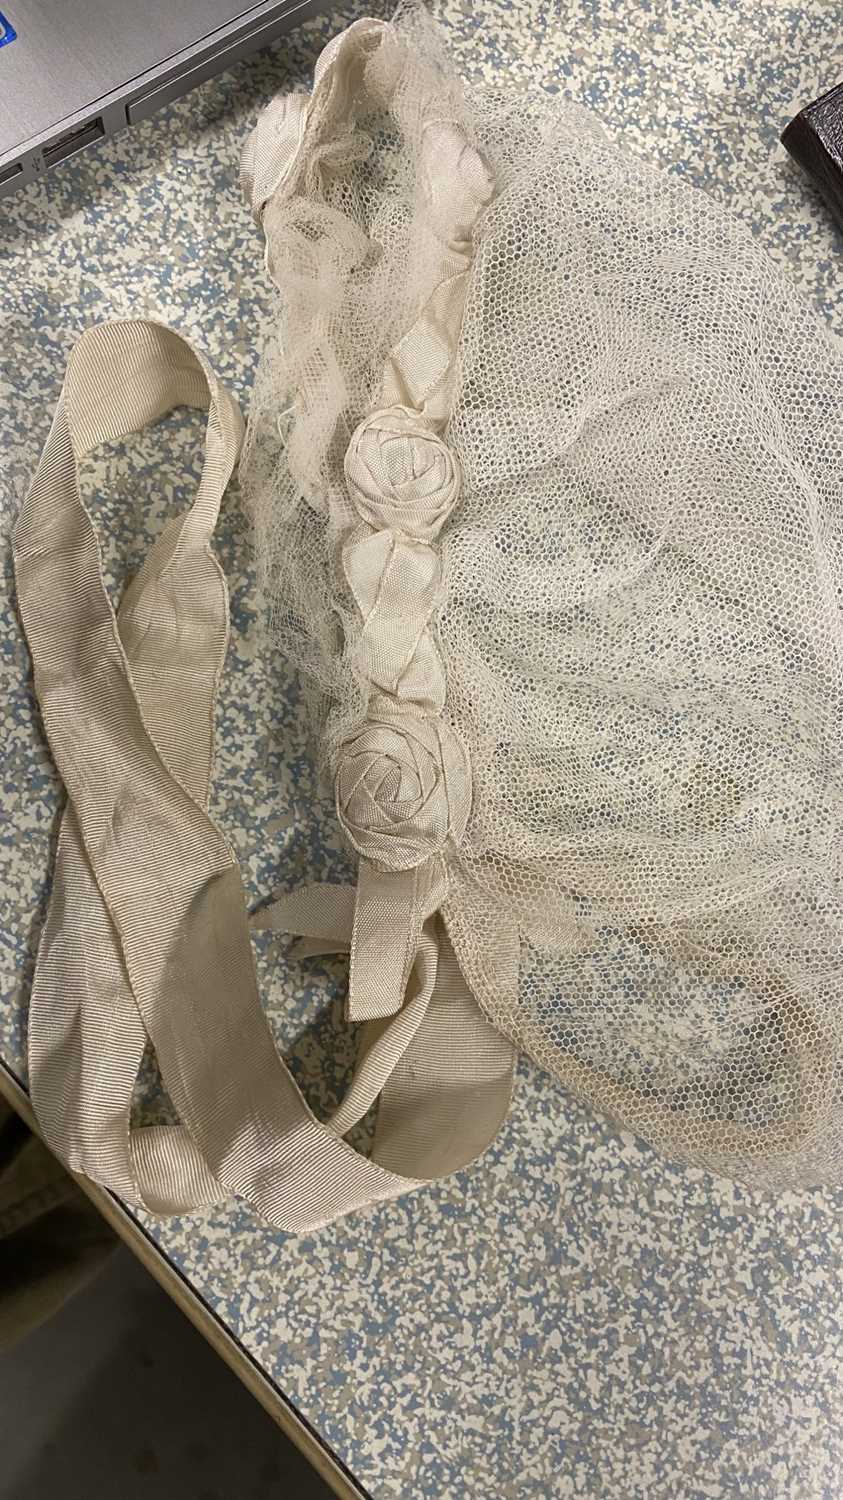 Assorted 19th Century and Later Costume Accessories comprising a pair of 19th century silvered - Image 7 of 14